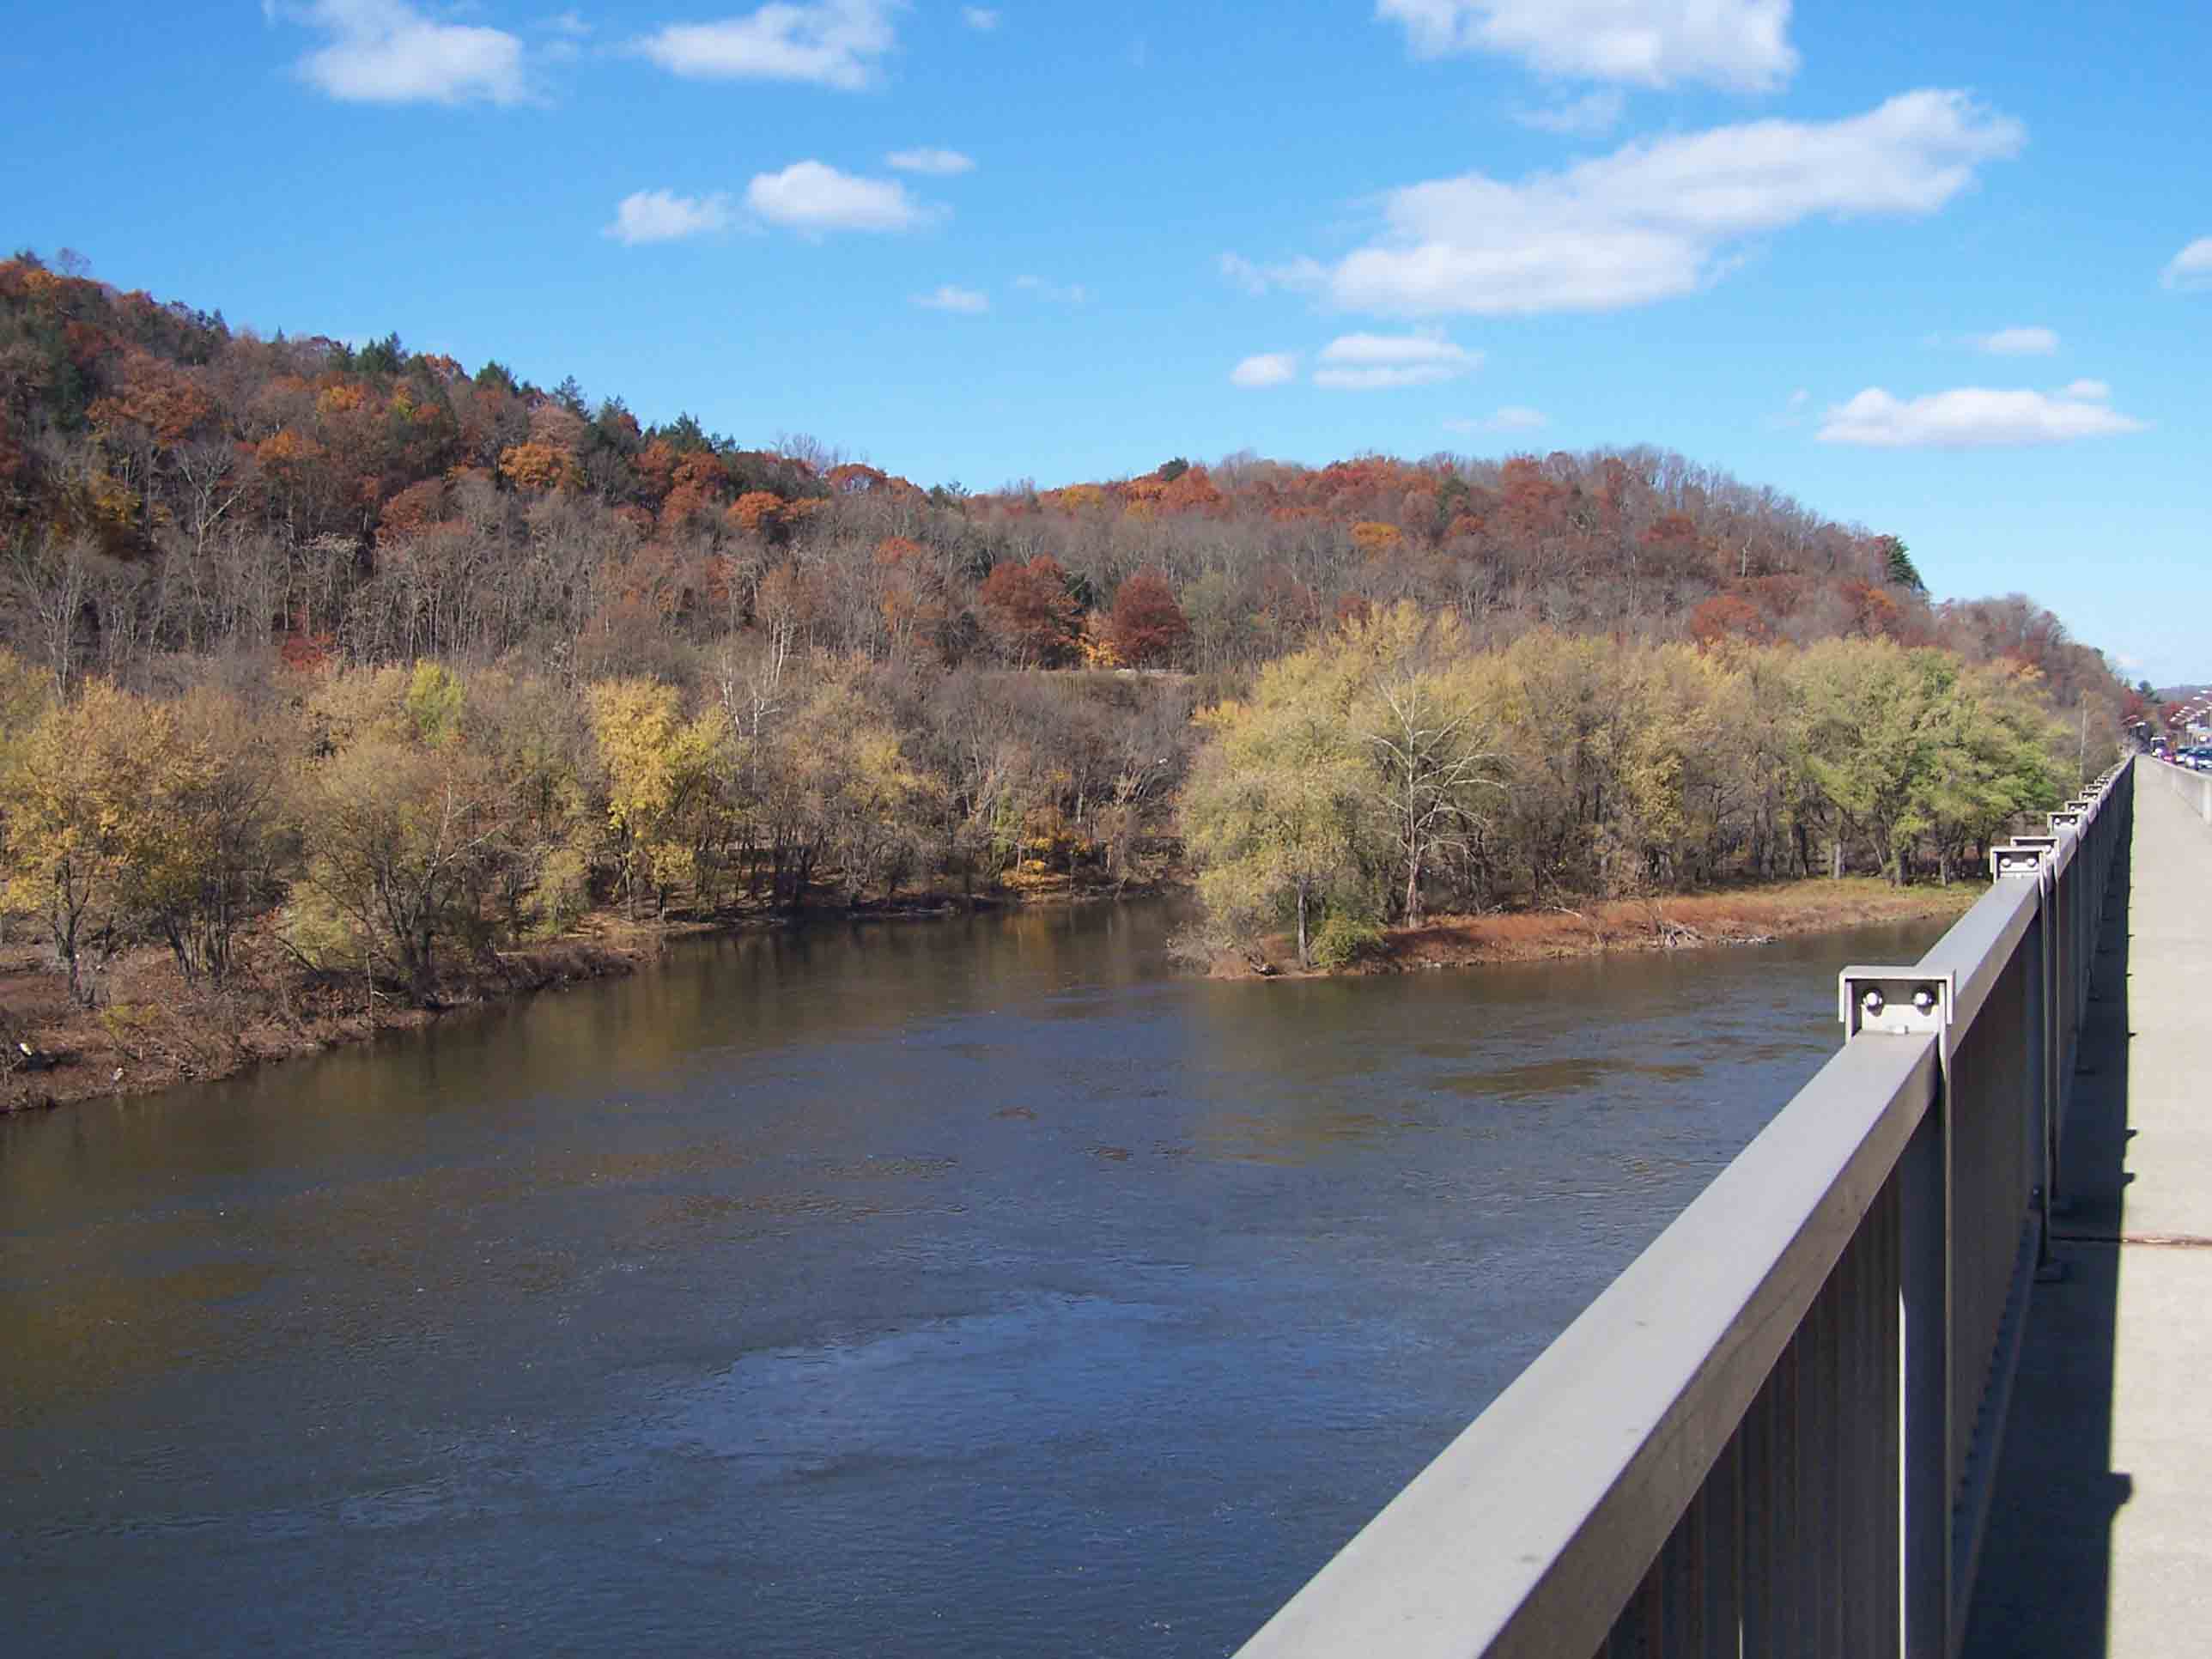 mm 13.4 View from bridge over Delaware River. Courtesy at@rohland.org